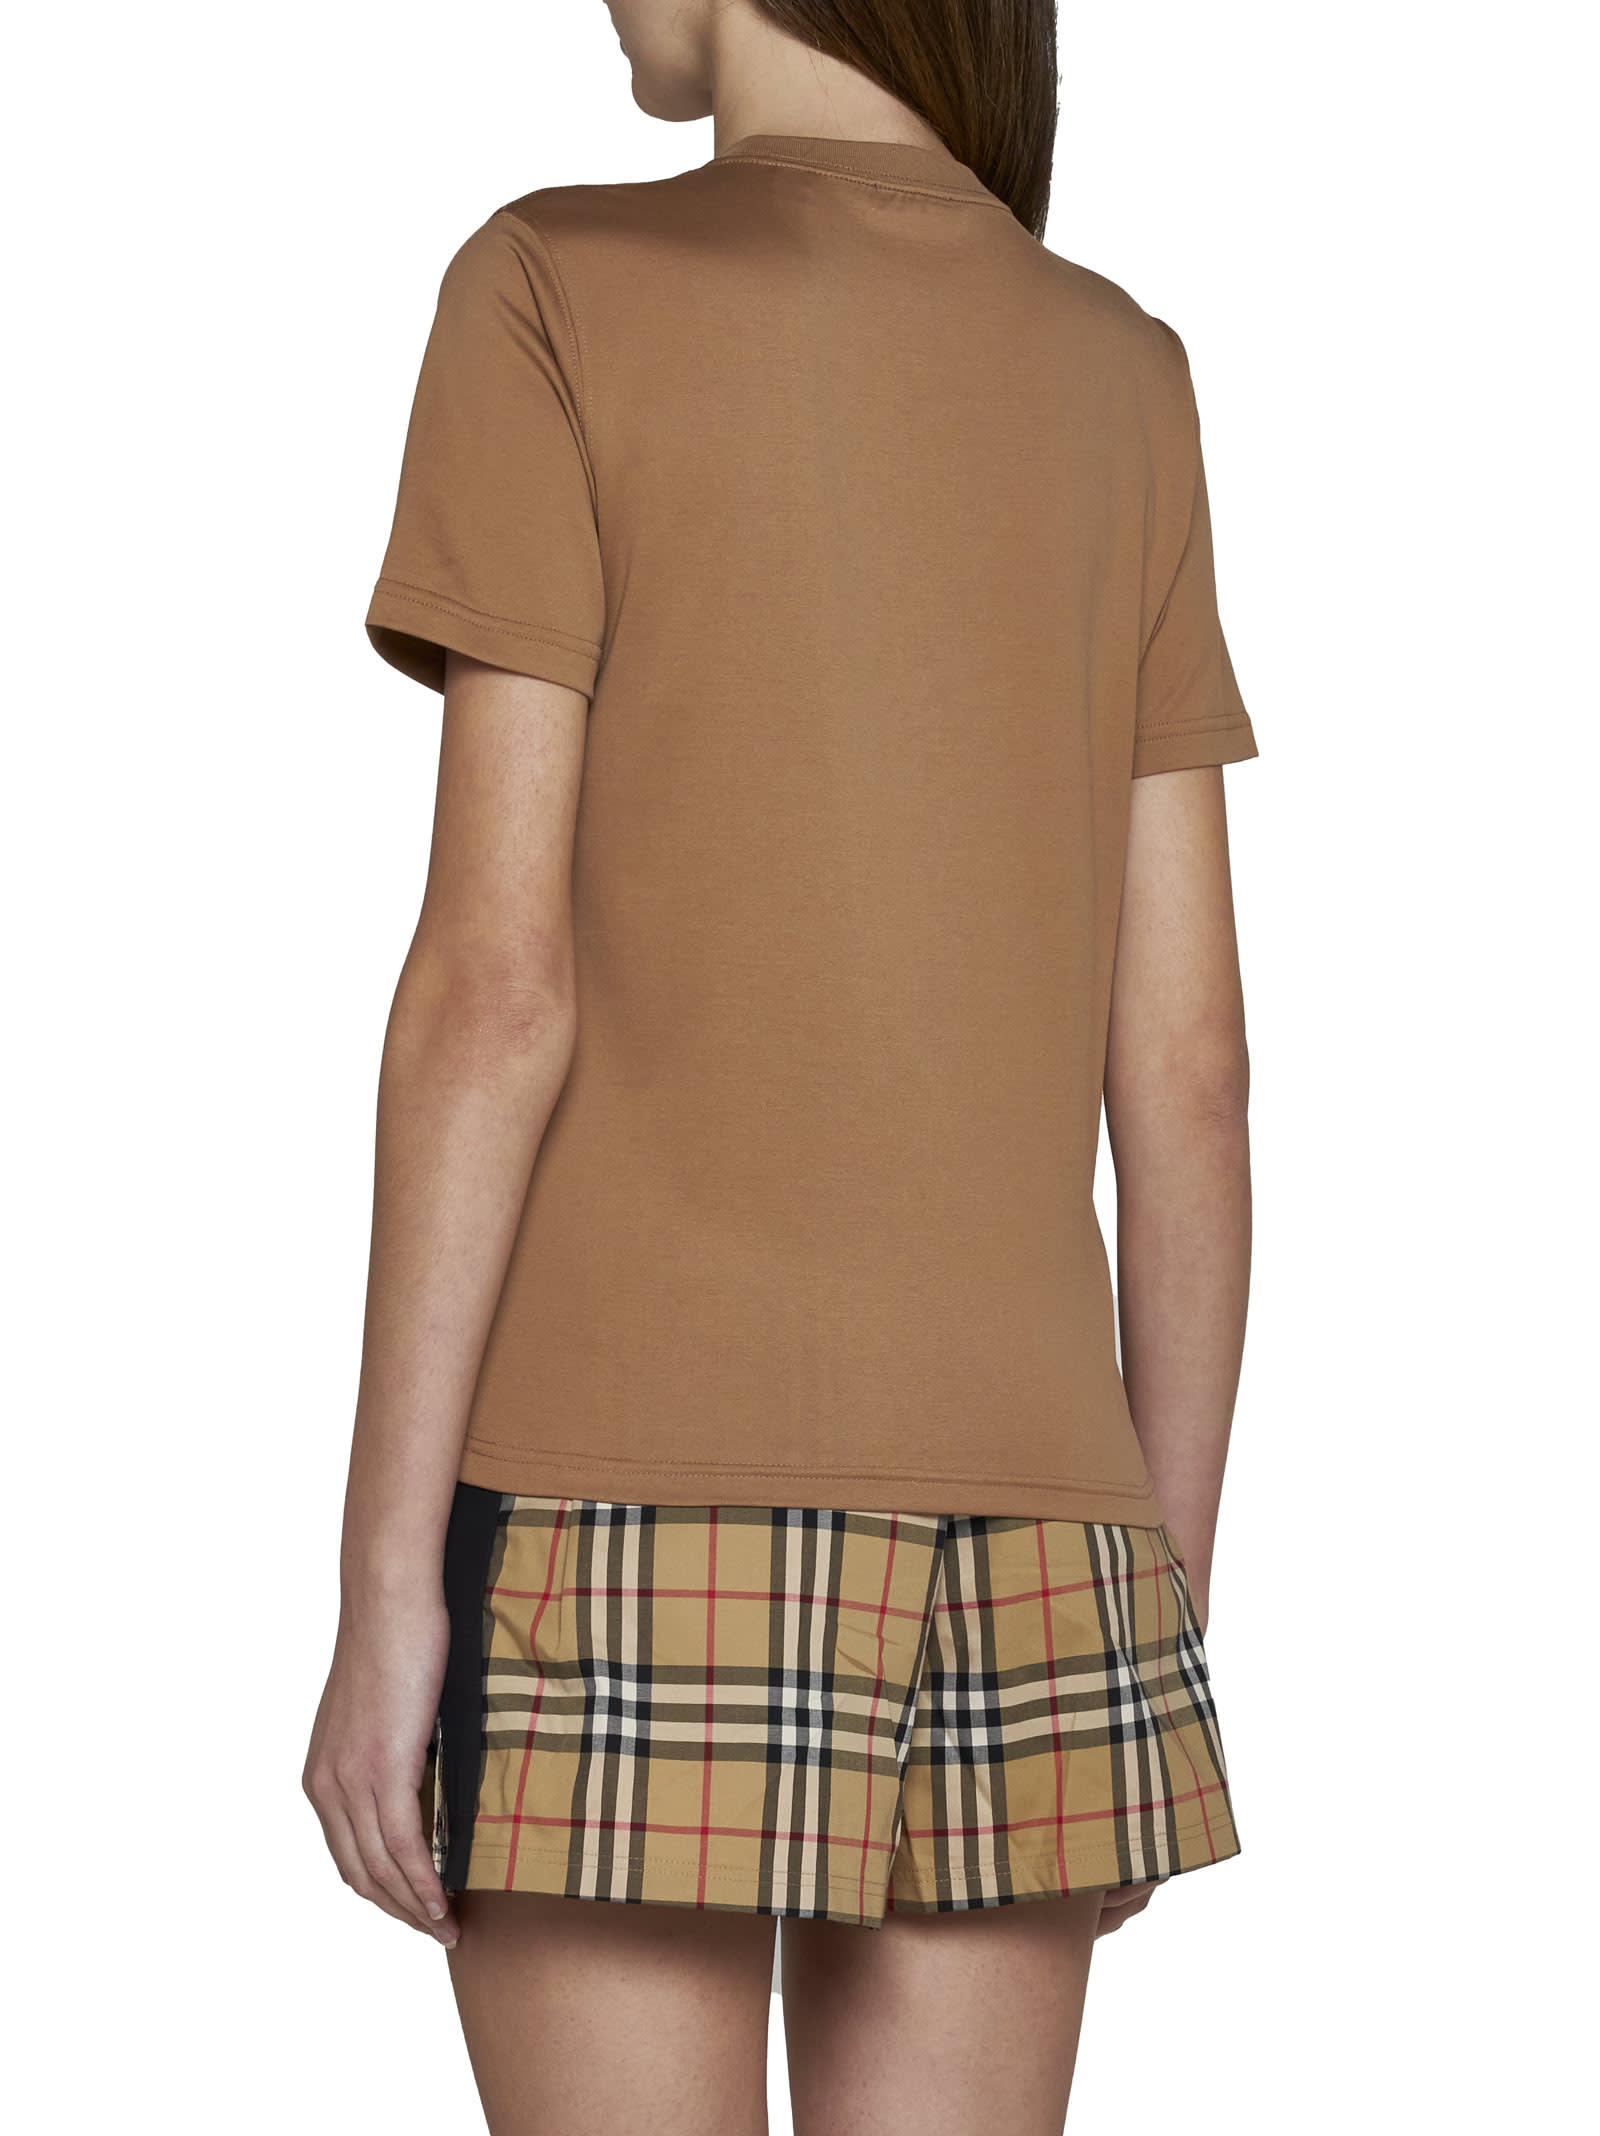 Shop Burberry T-shirt In Camel Legacy